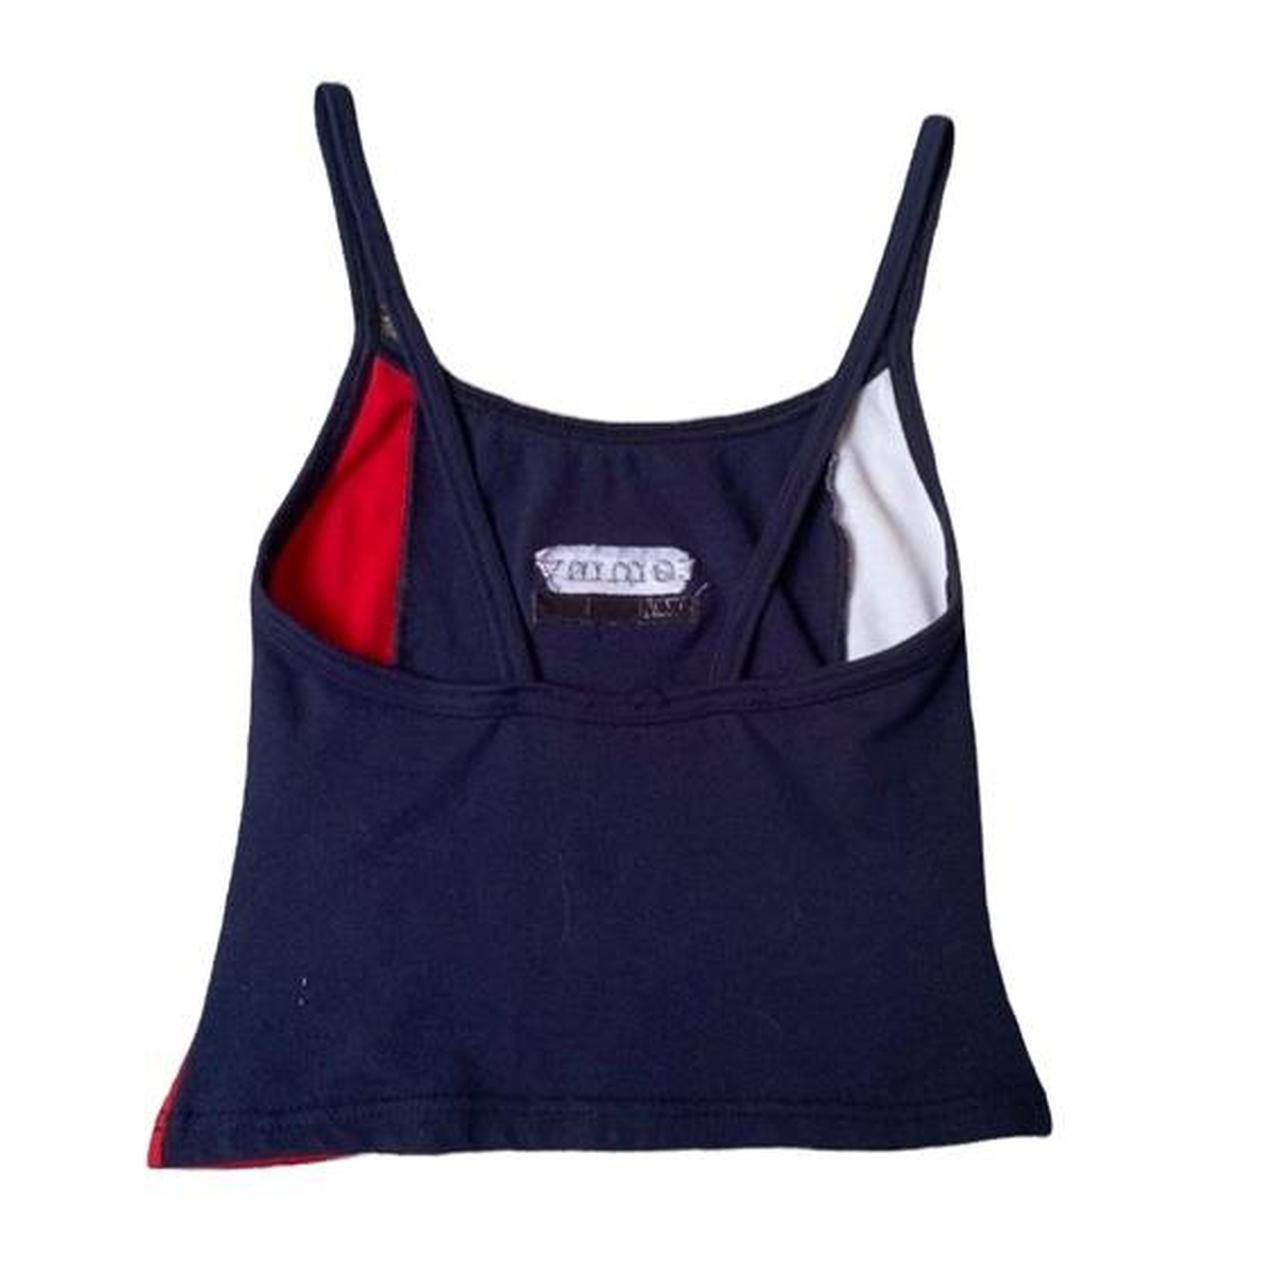 Classic Tommy Hilfiger tank. I bought this on depop... - Depop